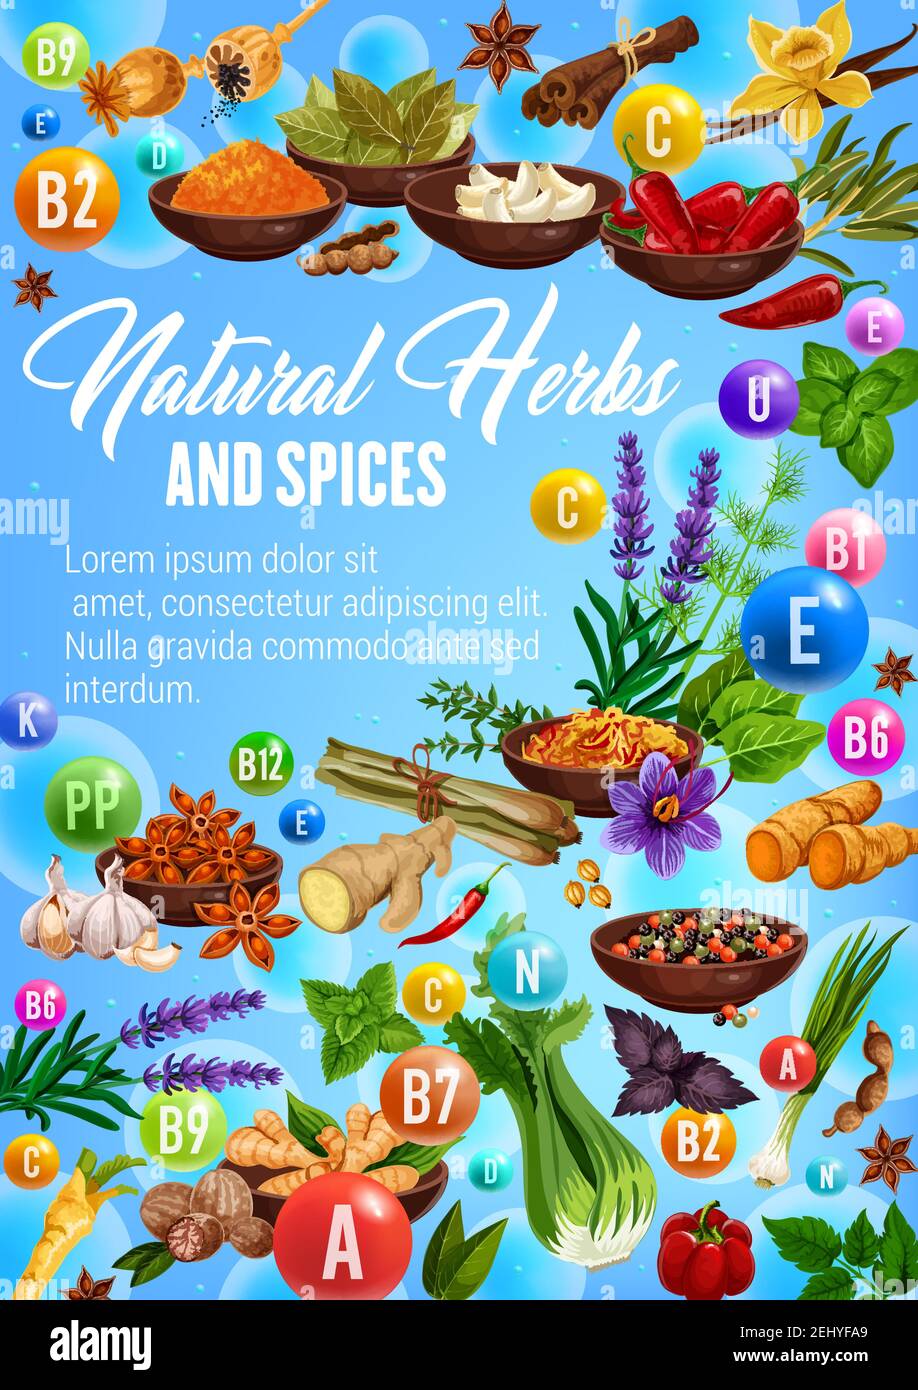 https://c8.alamy.com/comp/2EHYFA9/spices-cooking-herbs-and-herbal-seasonings-vitamins-vector-culinary-condiments-healthy-minerals-in-organic-cinnamon-pepper-or-nutmeg-and-natural-gi-2EHYFA9.jpg